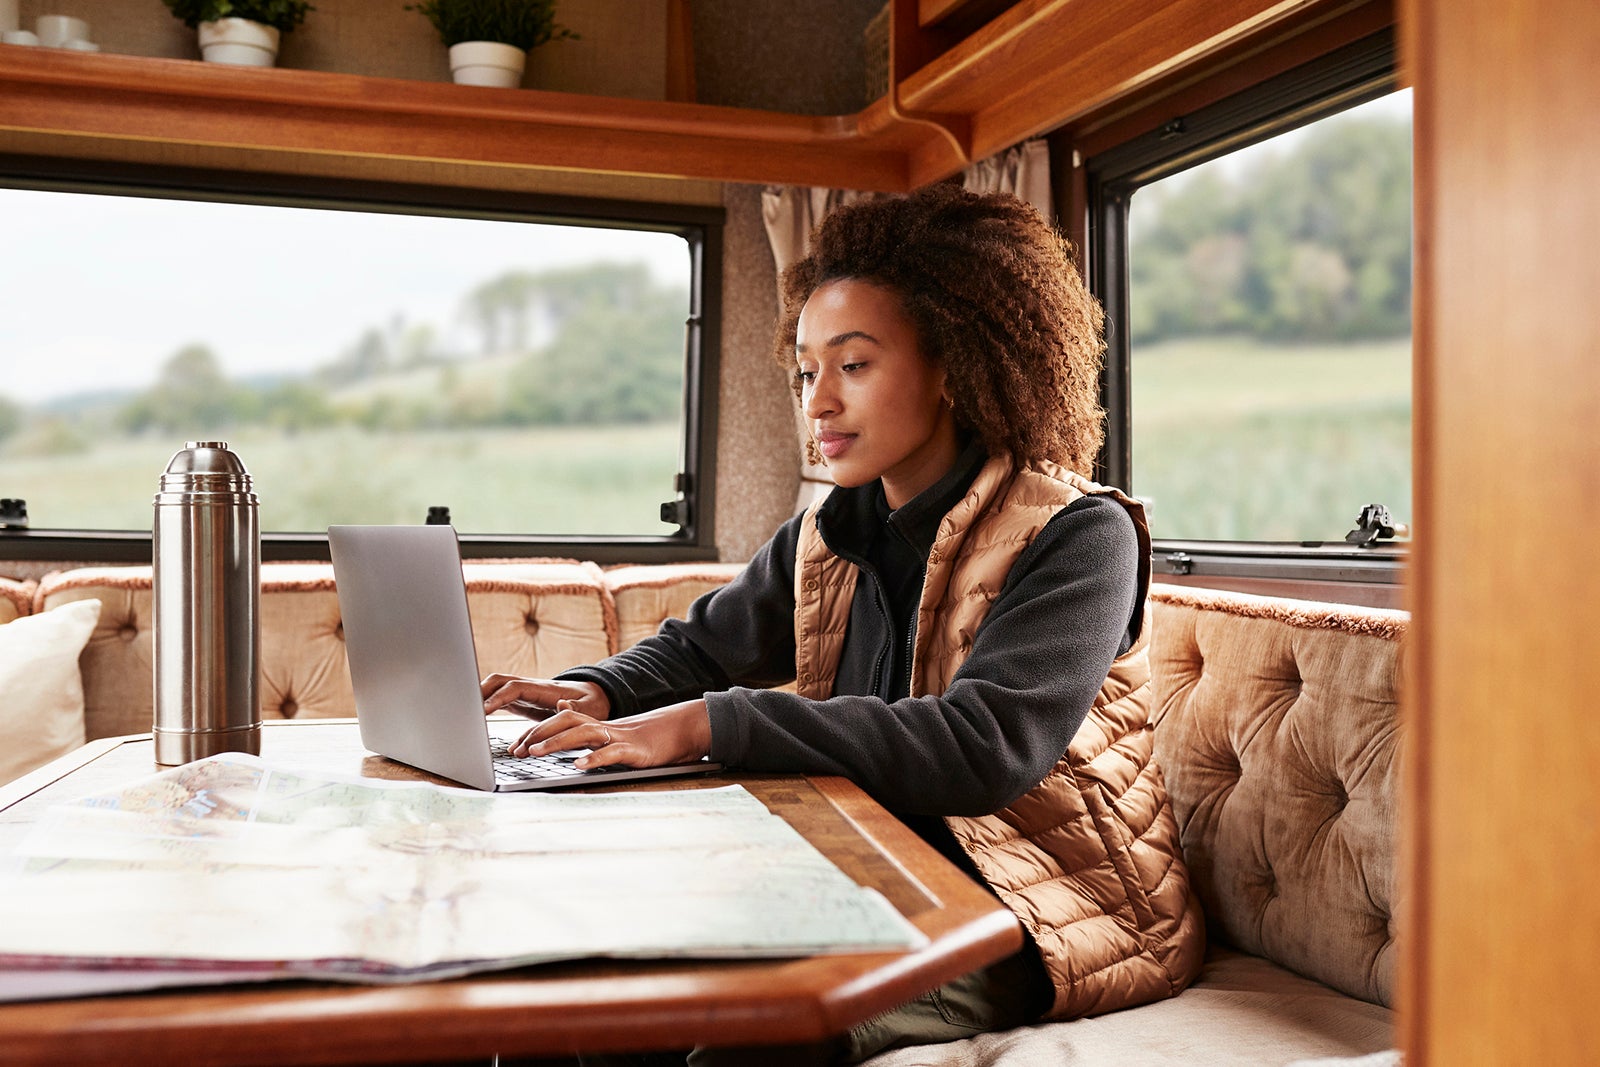 Person on laptop in an RV